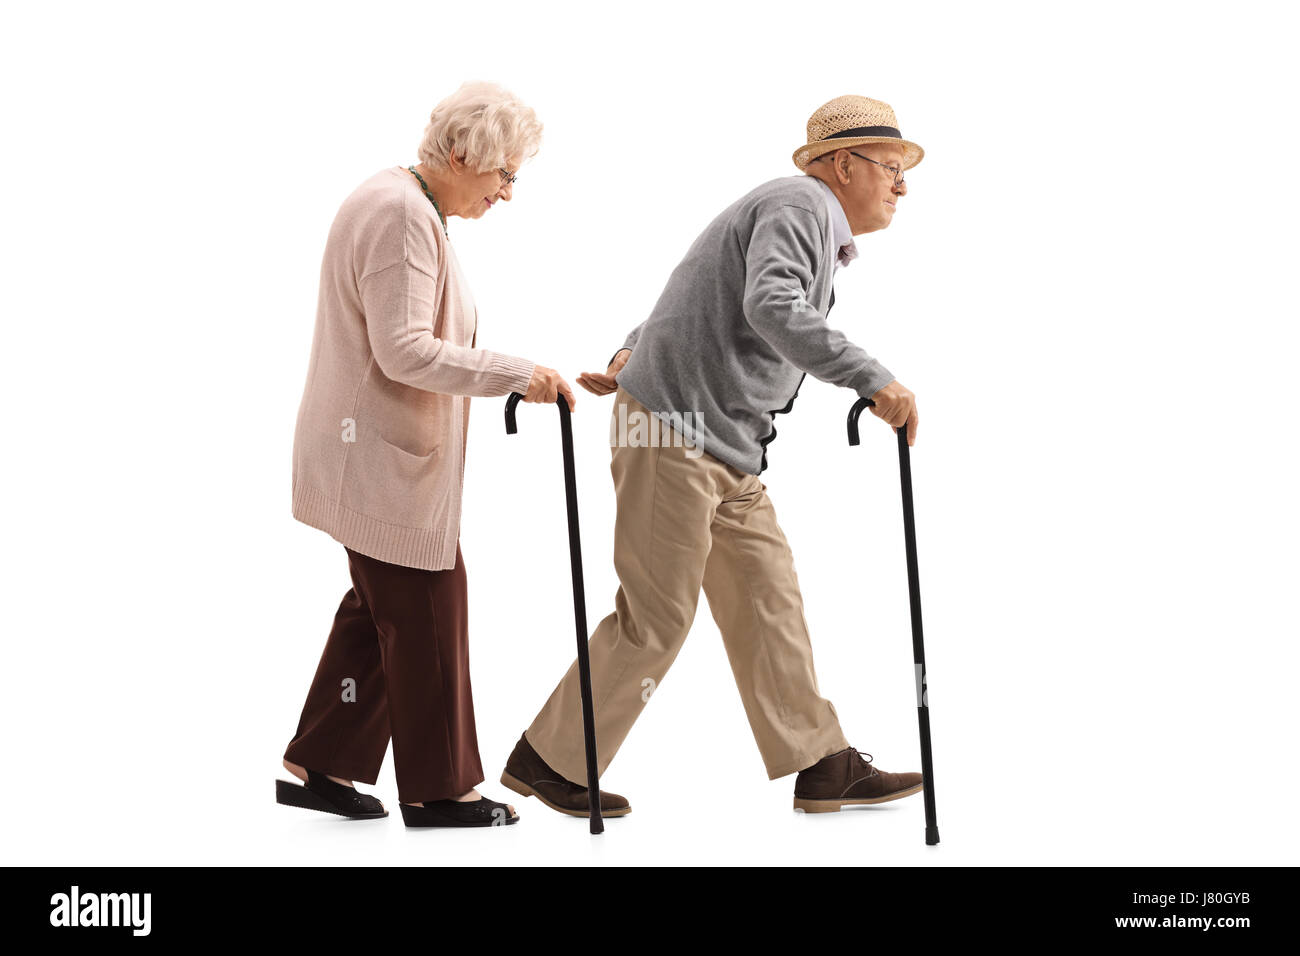 Full length profile shot of an elderly man and an elderly woman with canes walking isolated on white background Stock Photo